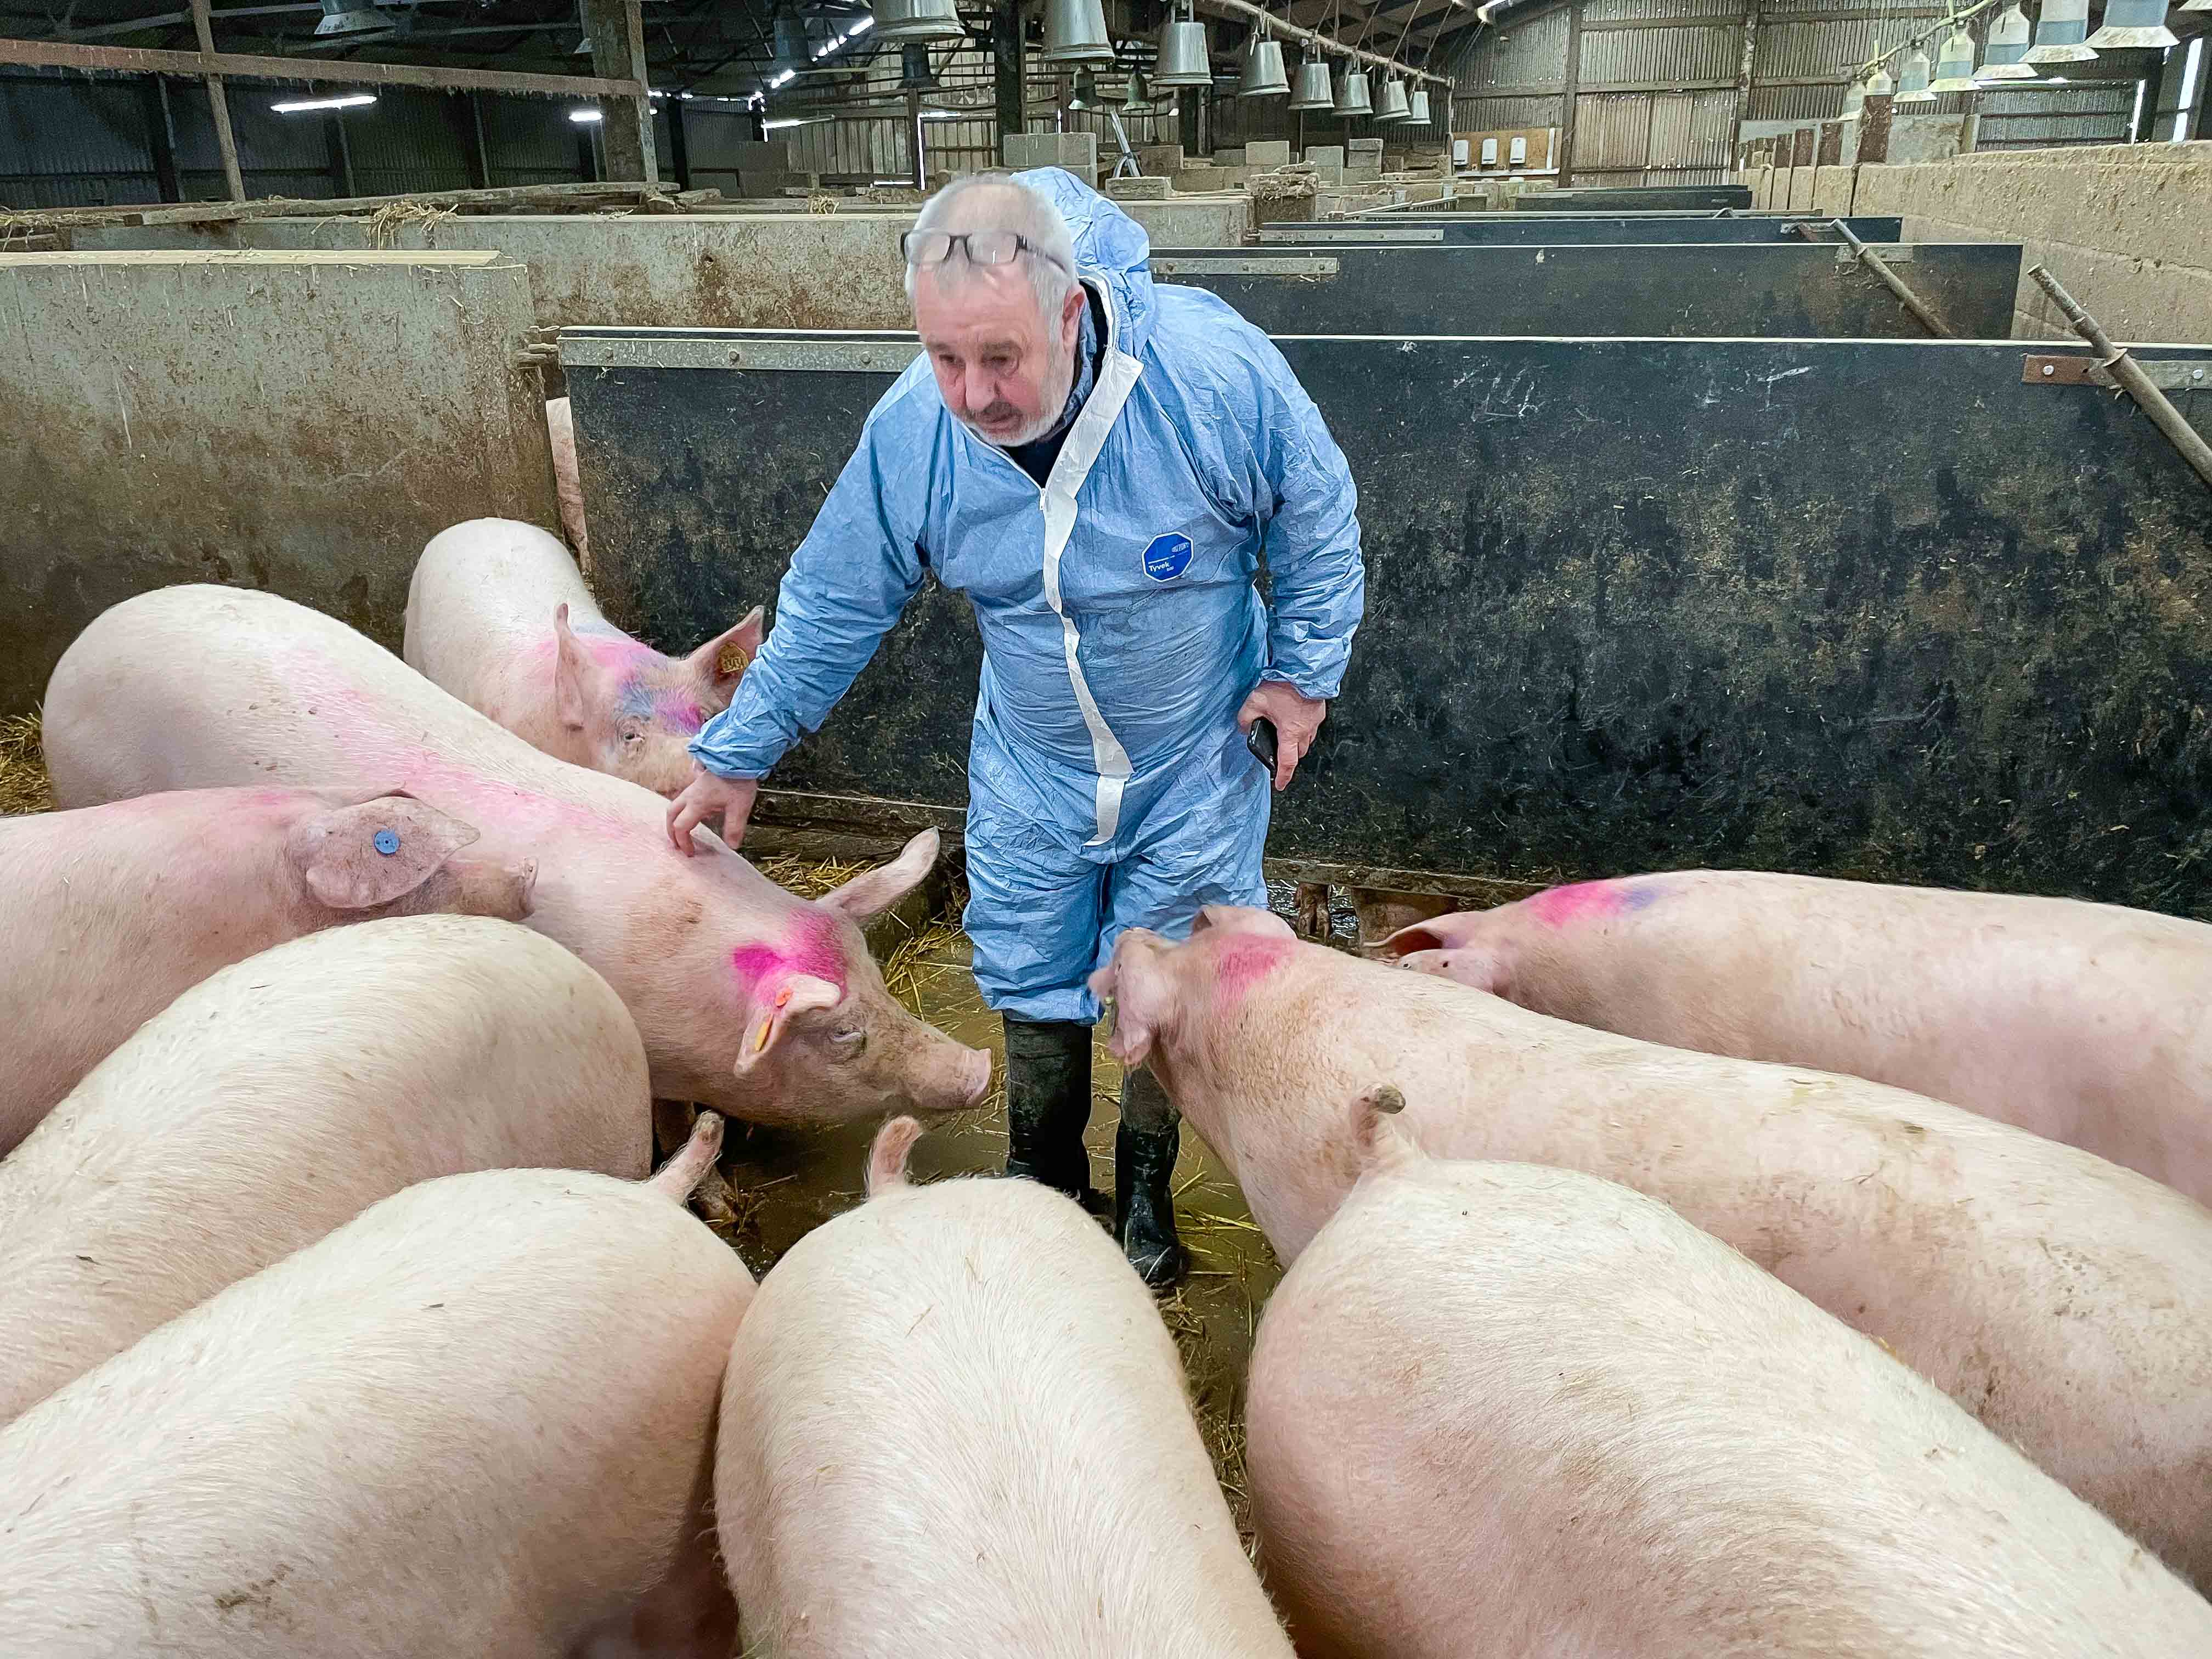 Pat surrounded by sows